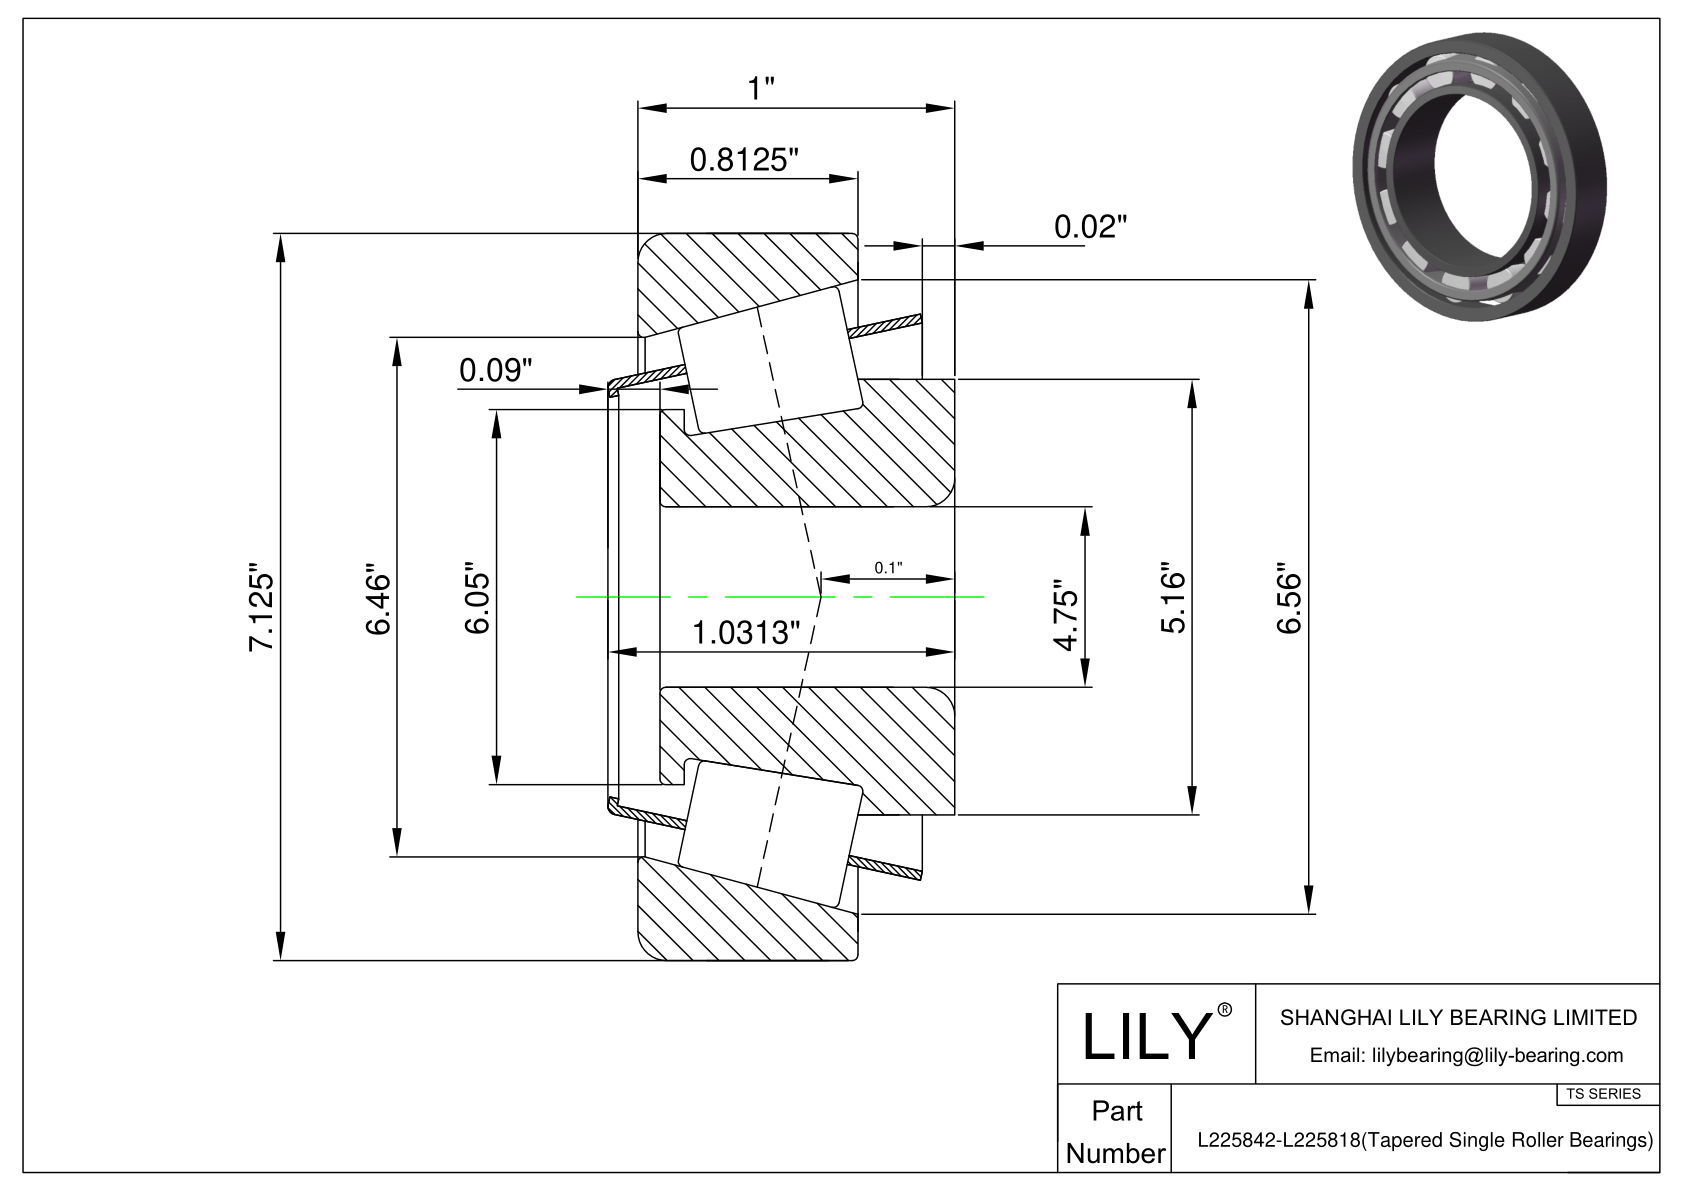 L225842-L225818 TS (Tapered Single Roller Bearings) (Imperial) cad drawing